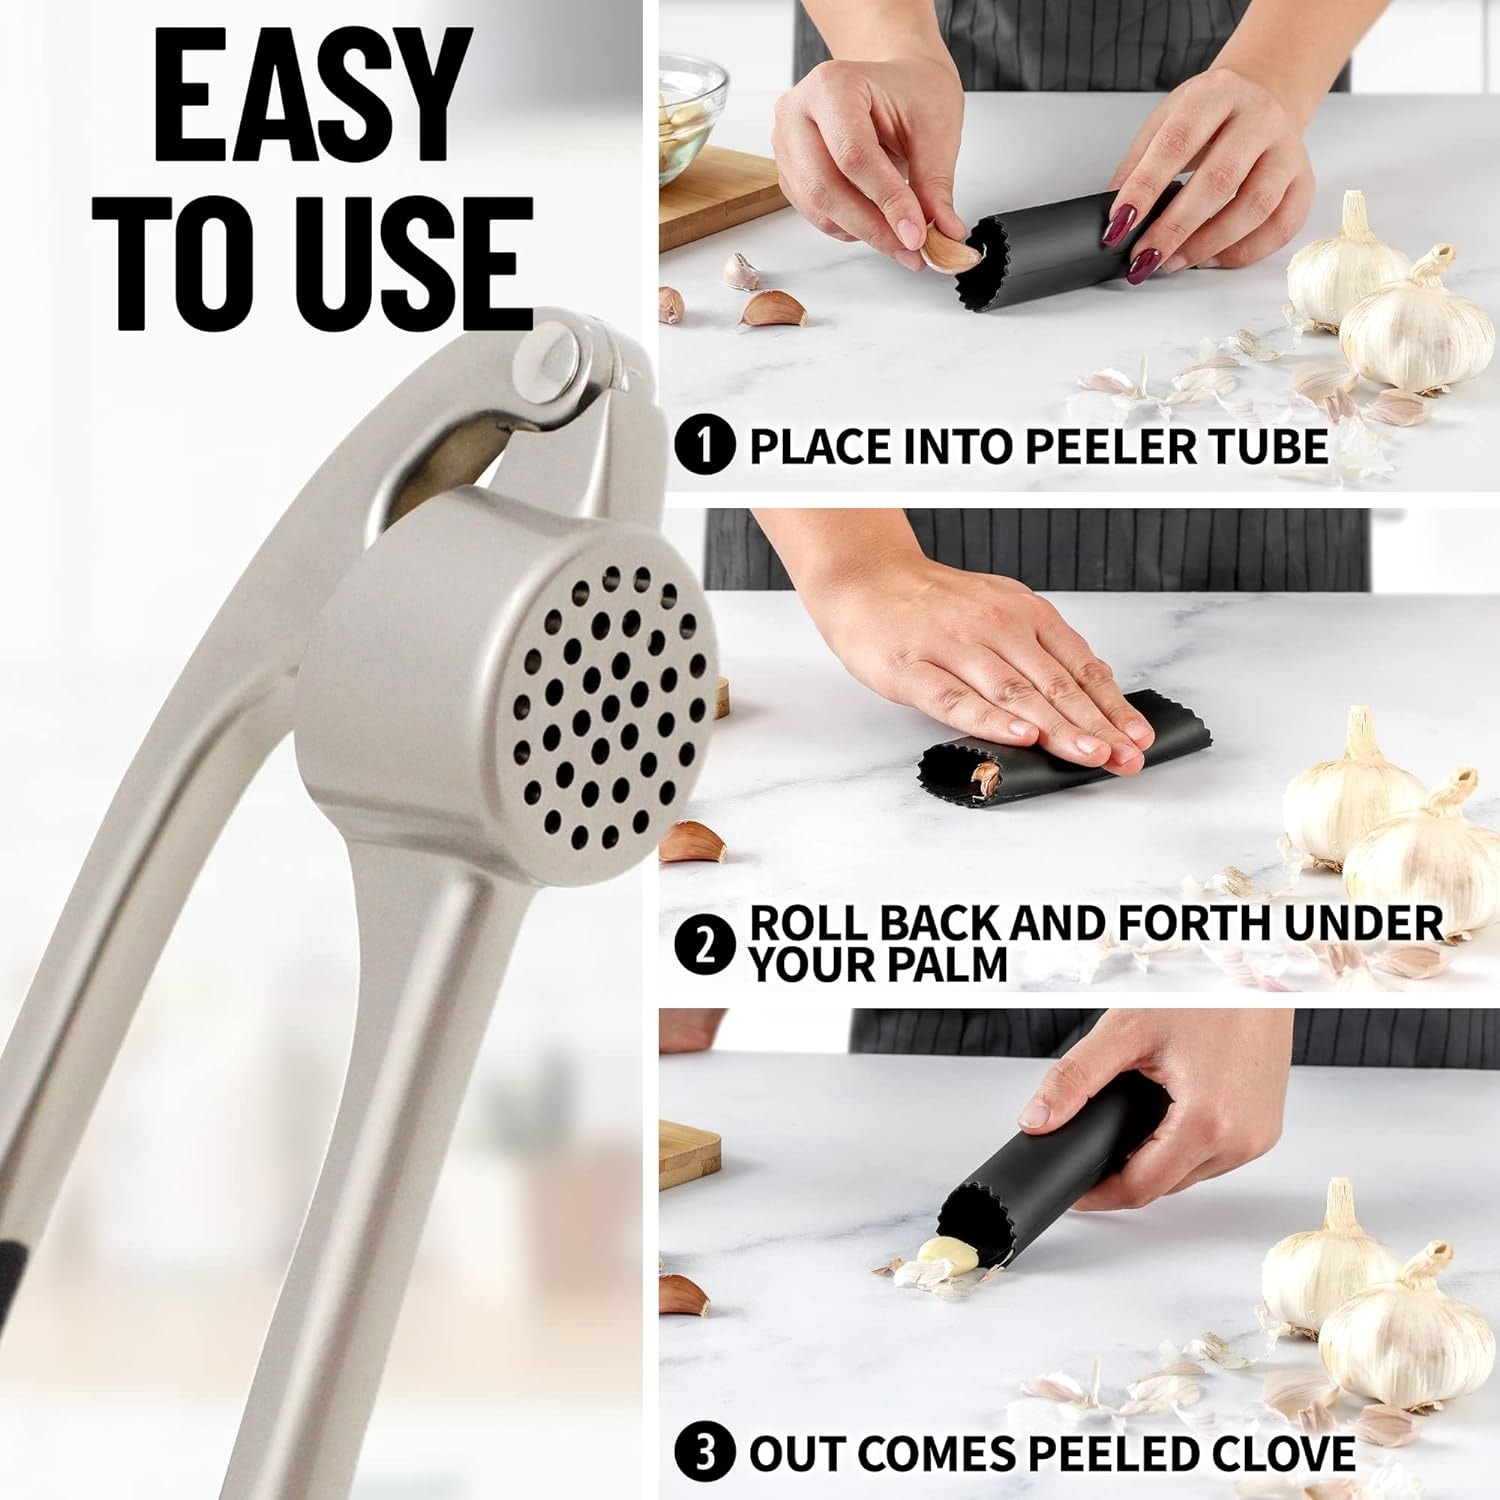 https://ak1.ostkcdn.com/images/products/is/images/direct/b7fae0772cd4534332070338c64b86695c5054be/Zulay-Kitchen-Professional-Garlic-Press-and-Peeler.jpg